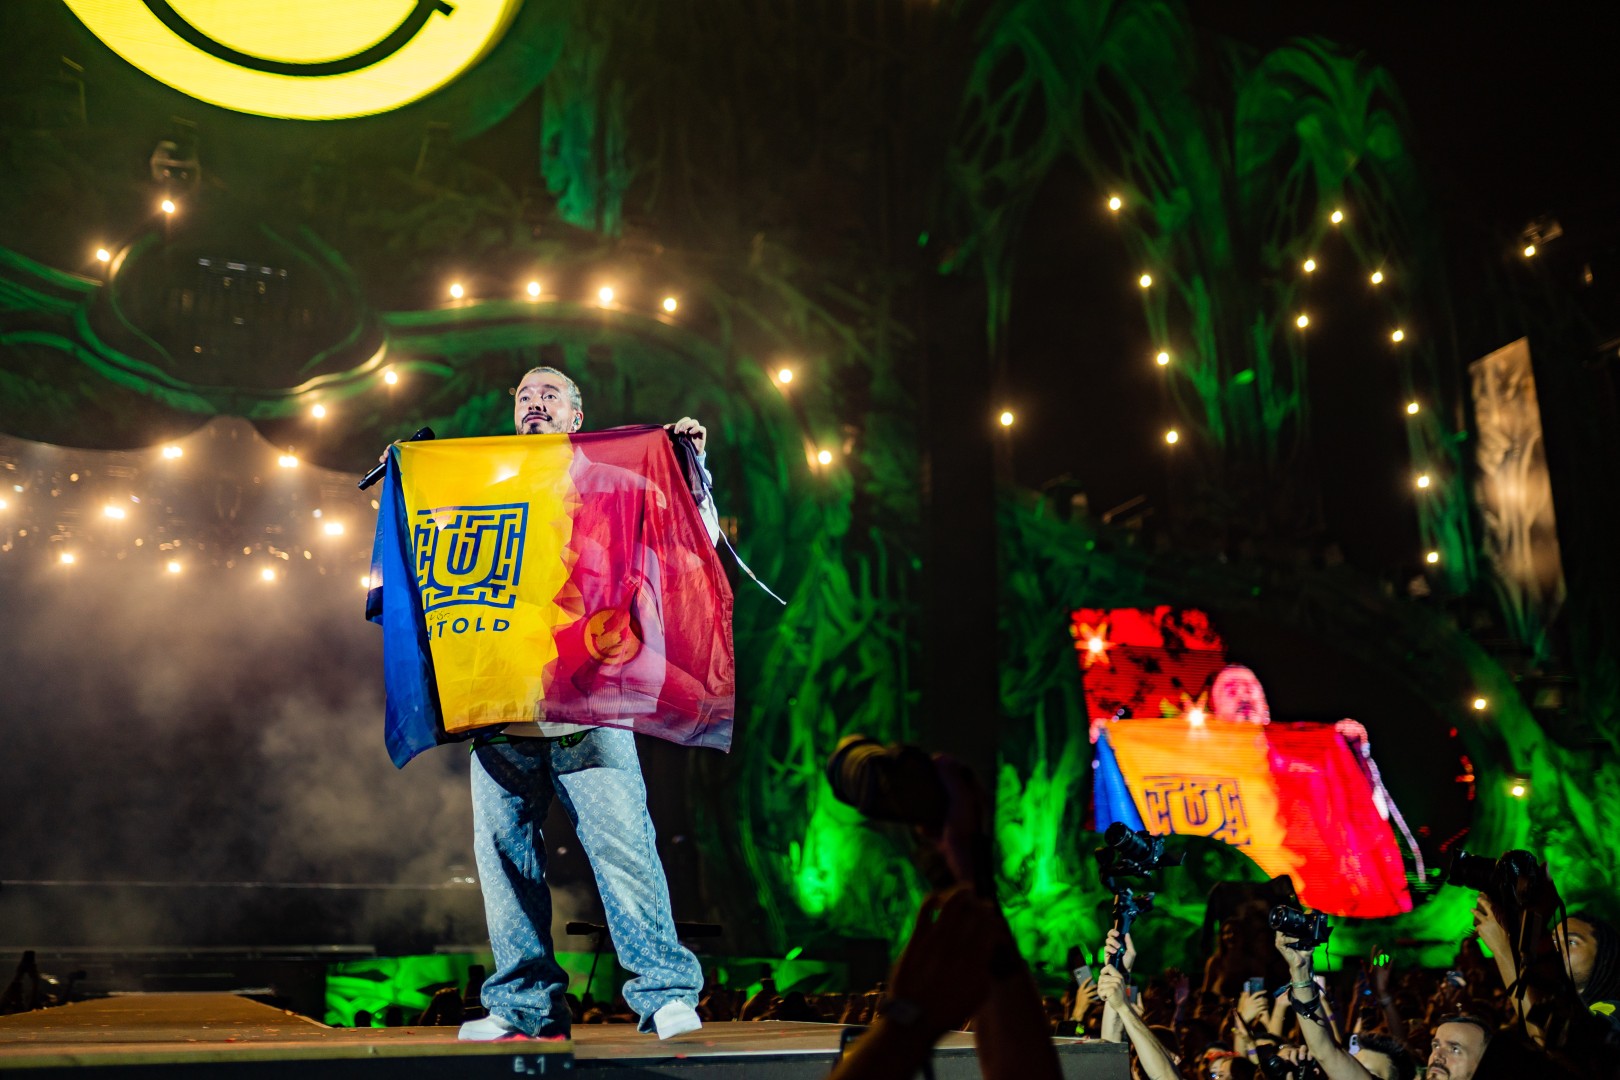 J Balvin at Cluj Arena in Cluj-Napoca on August 7, 2022 (e5942c9c24)